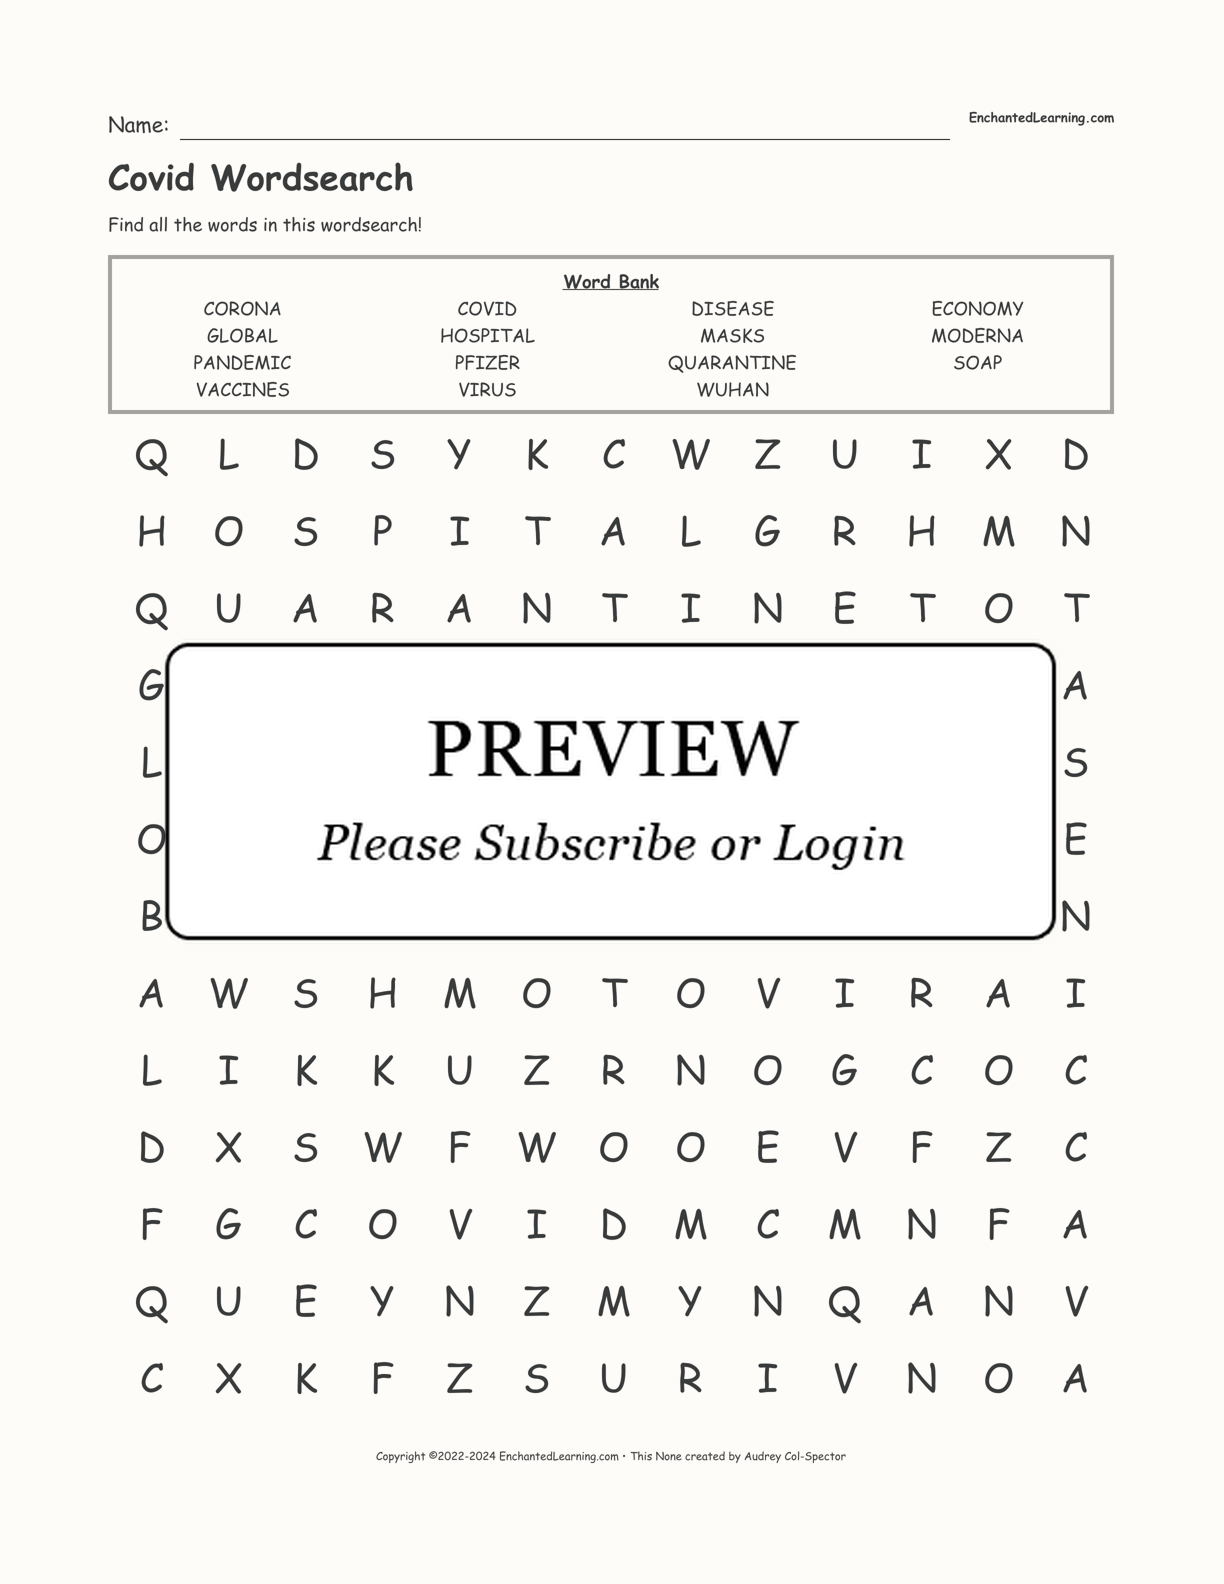 Covid Wordsearch interactive worksheet page 1